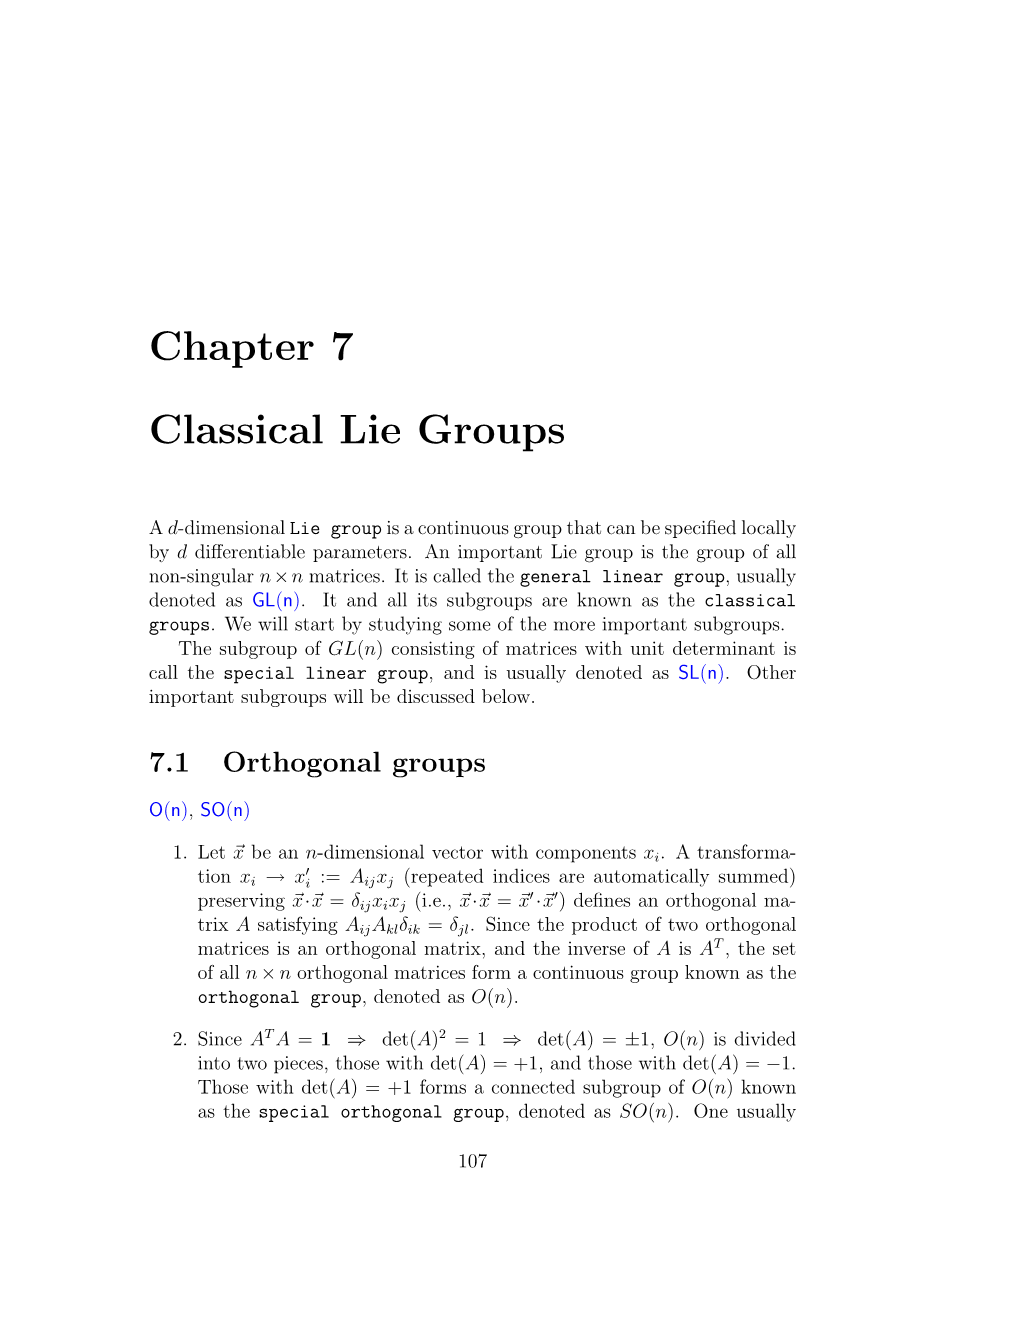 Chapter 7 Classical Lie Groups